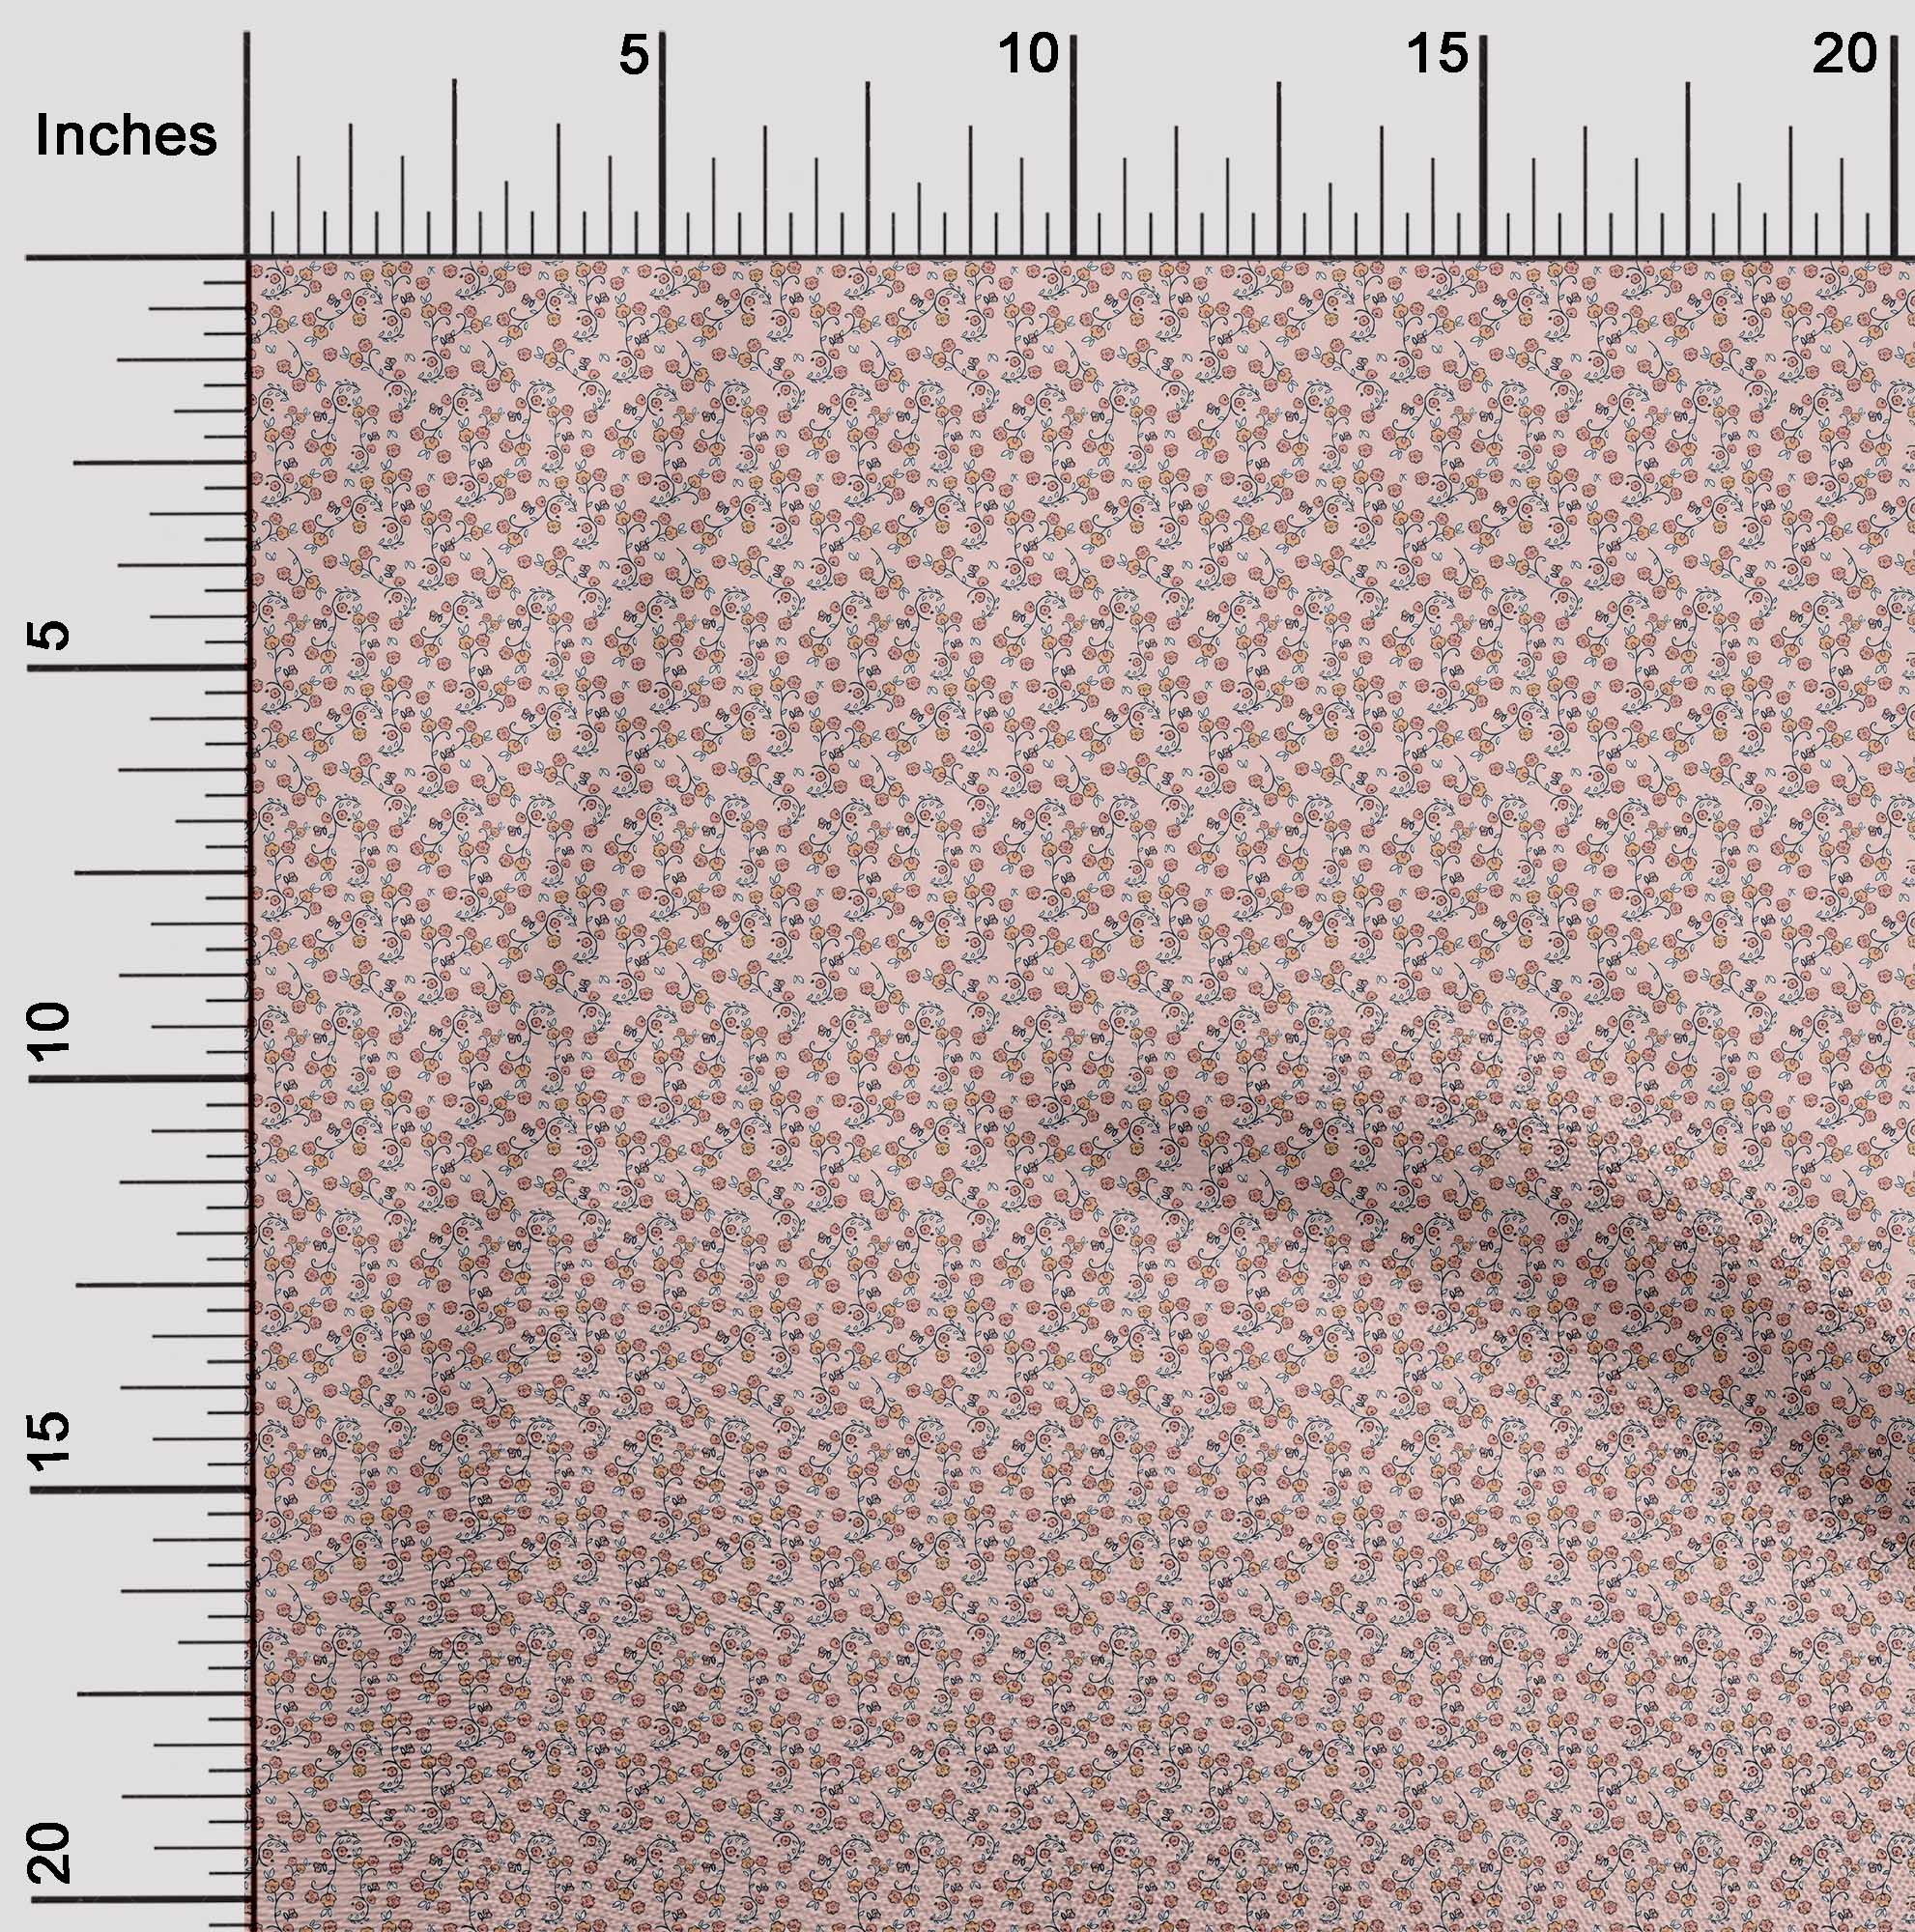 oneOone Silk Tabby Light Pink Fabric Floral Ditsy Quilting Supplies Print  Sewing Fabric By The Yard 42 Inch Wide 